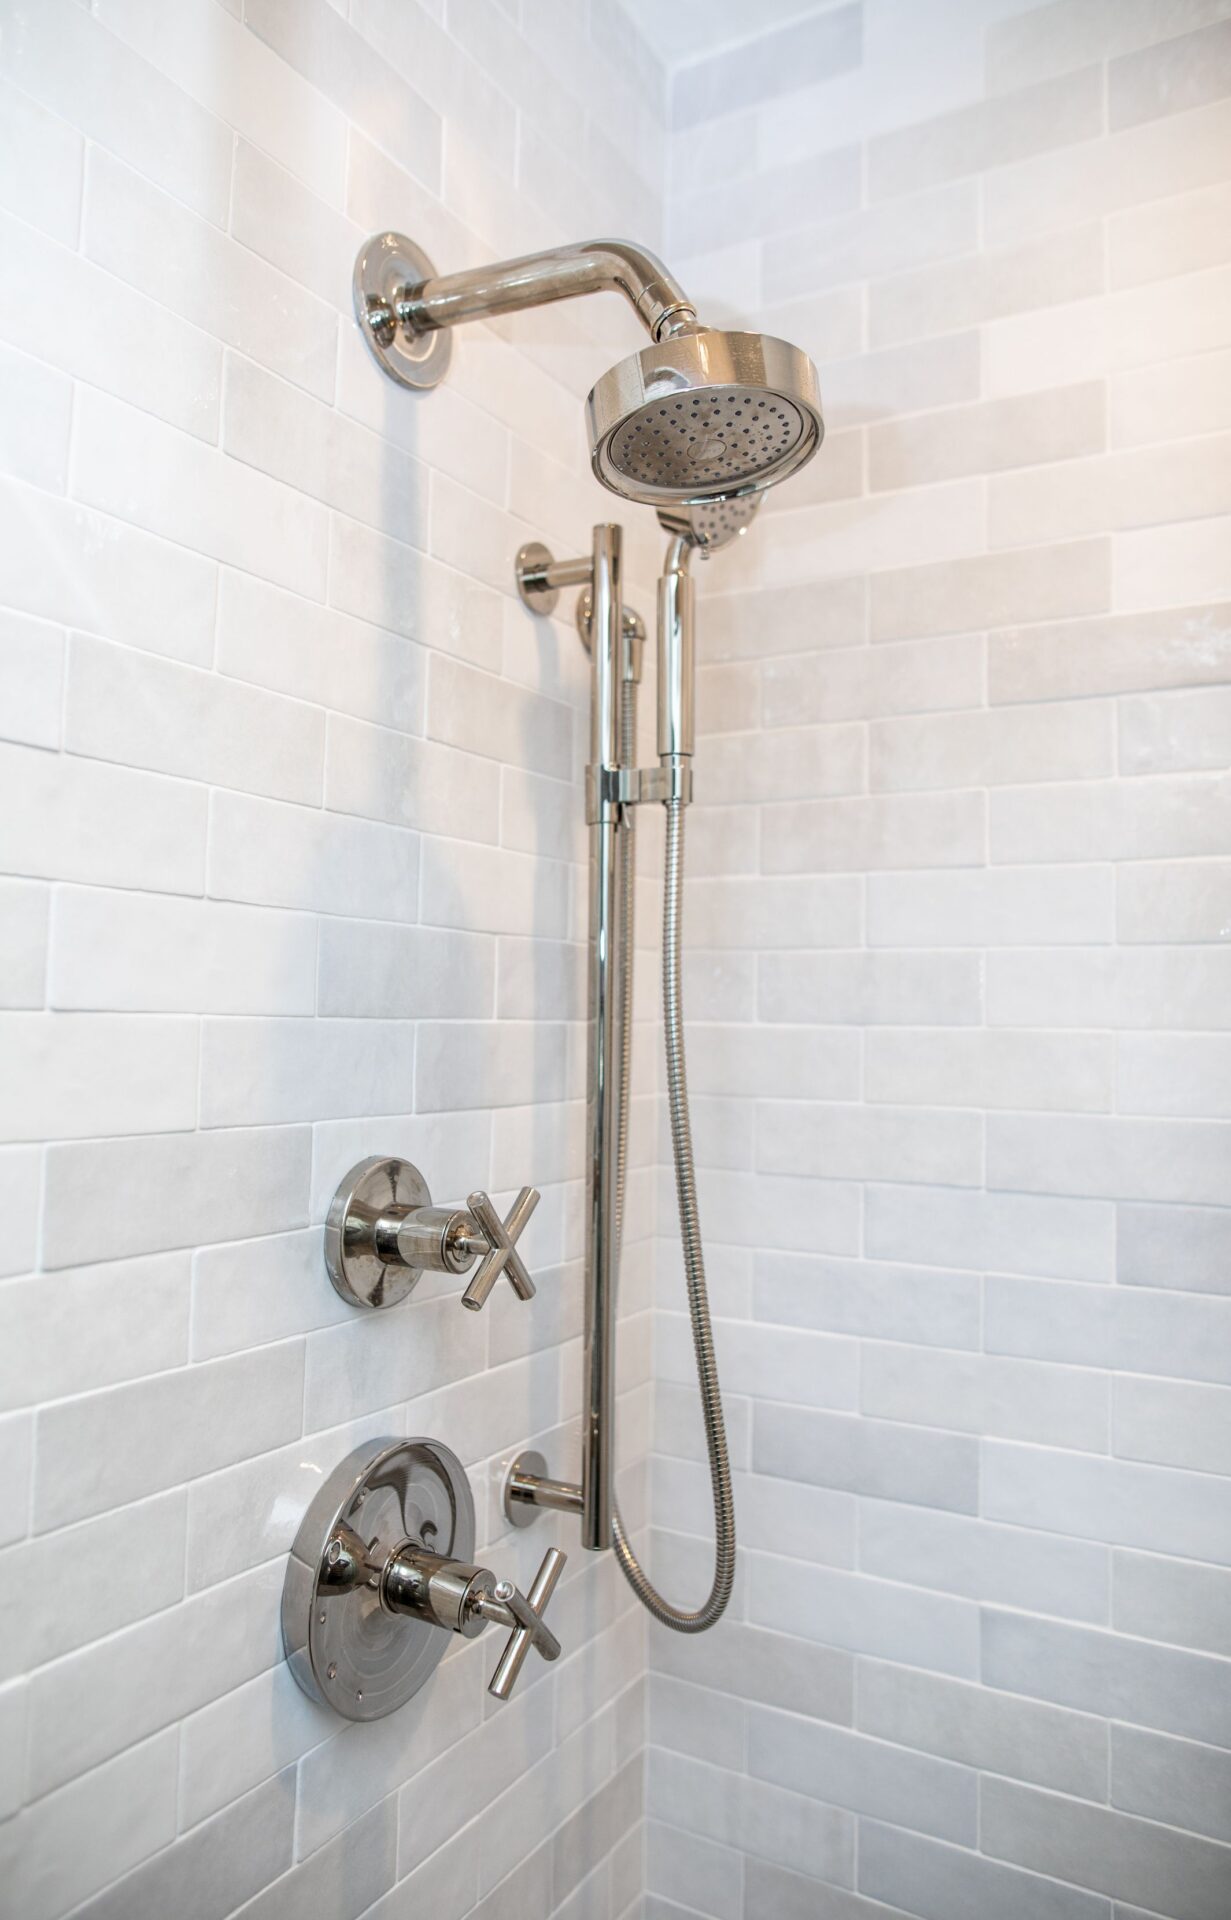 A shower with a silver head and hand held shower.